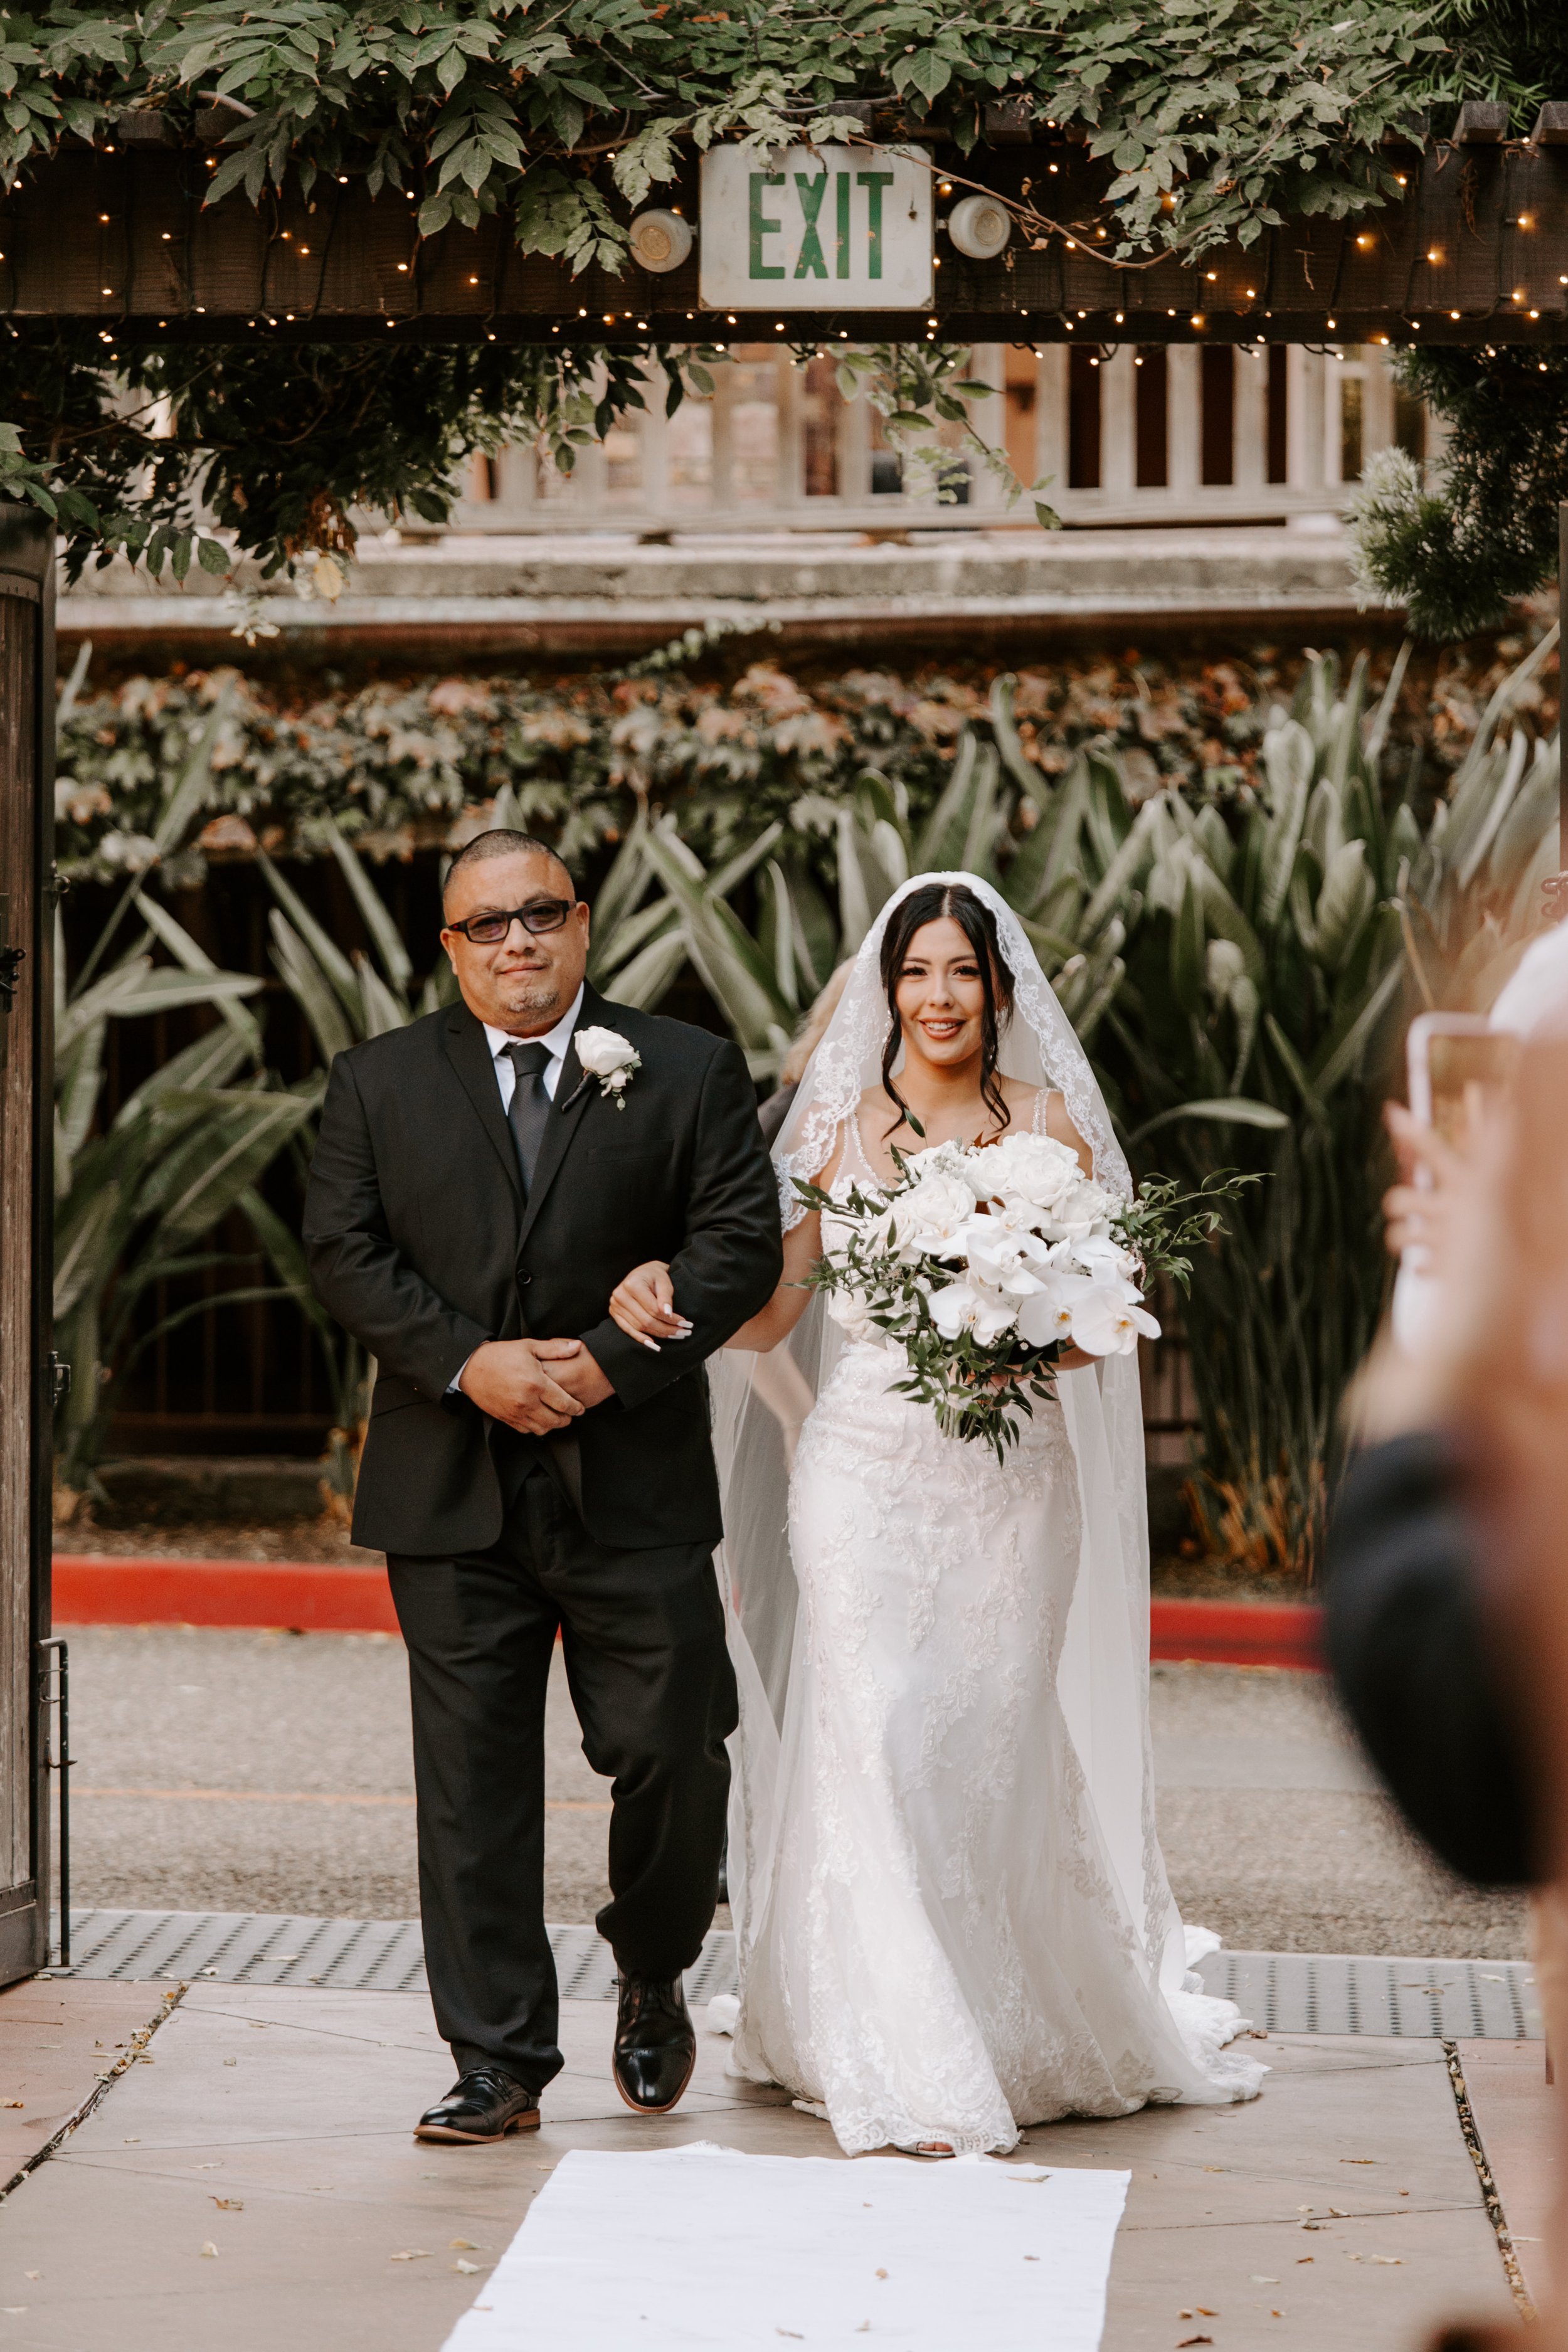 Ashley and Andrew Wedding at the San Juan Capistrano Mission and the Franciscan Gardens by Kara Reynolds Photography406.jpg